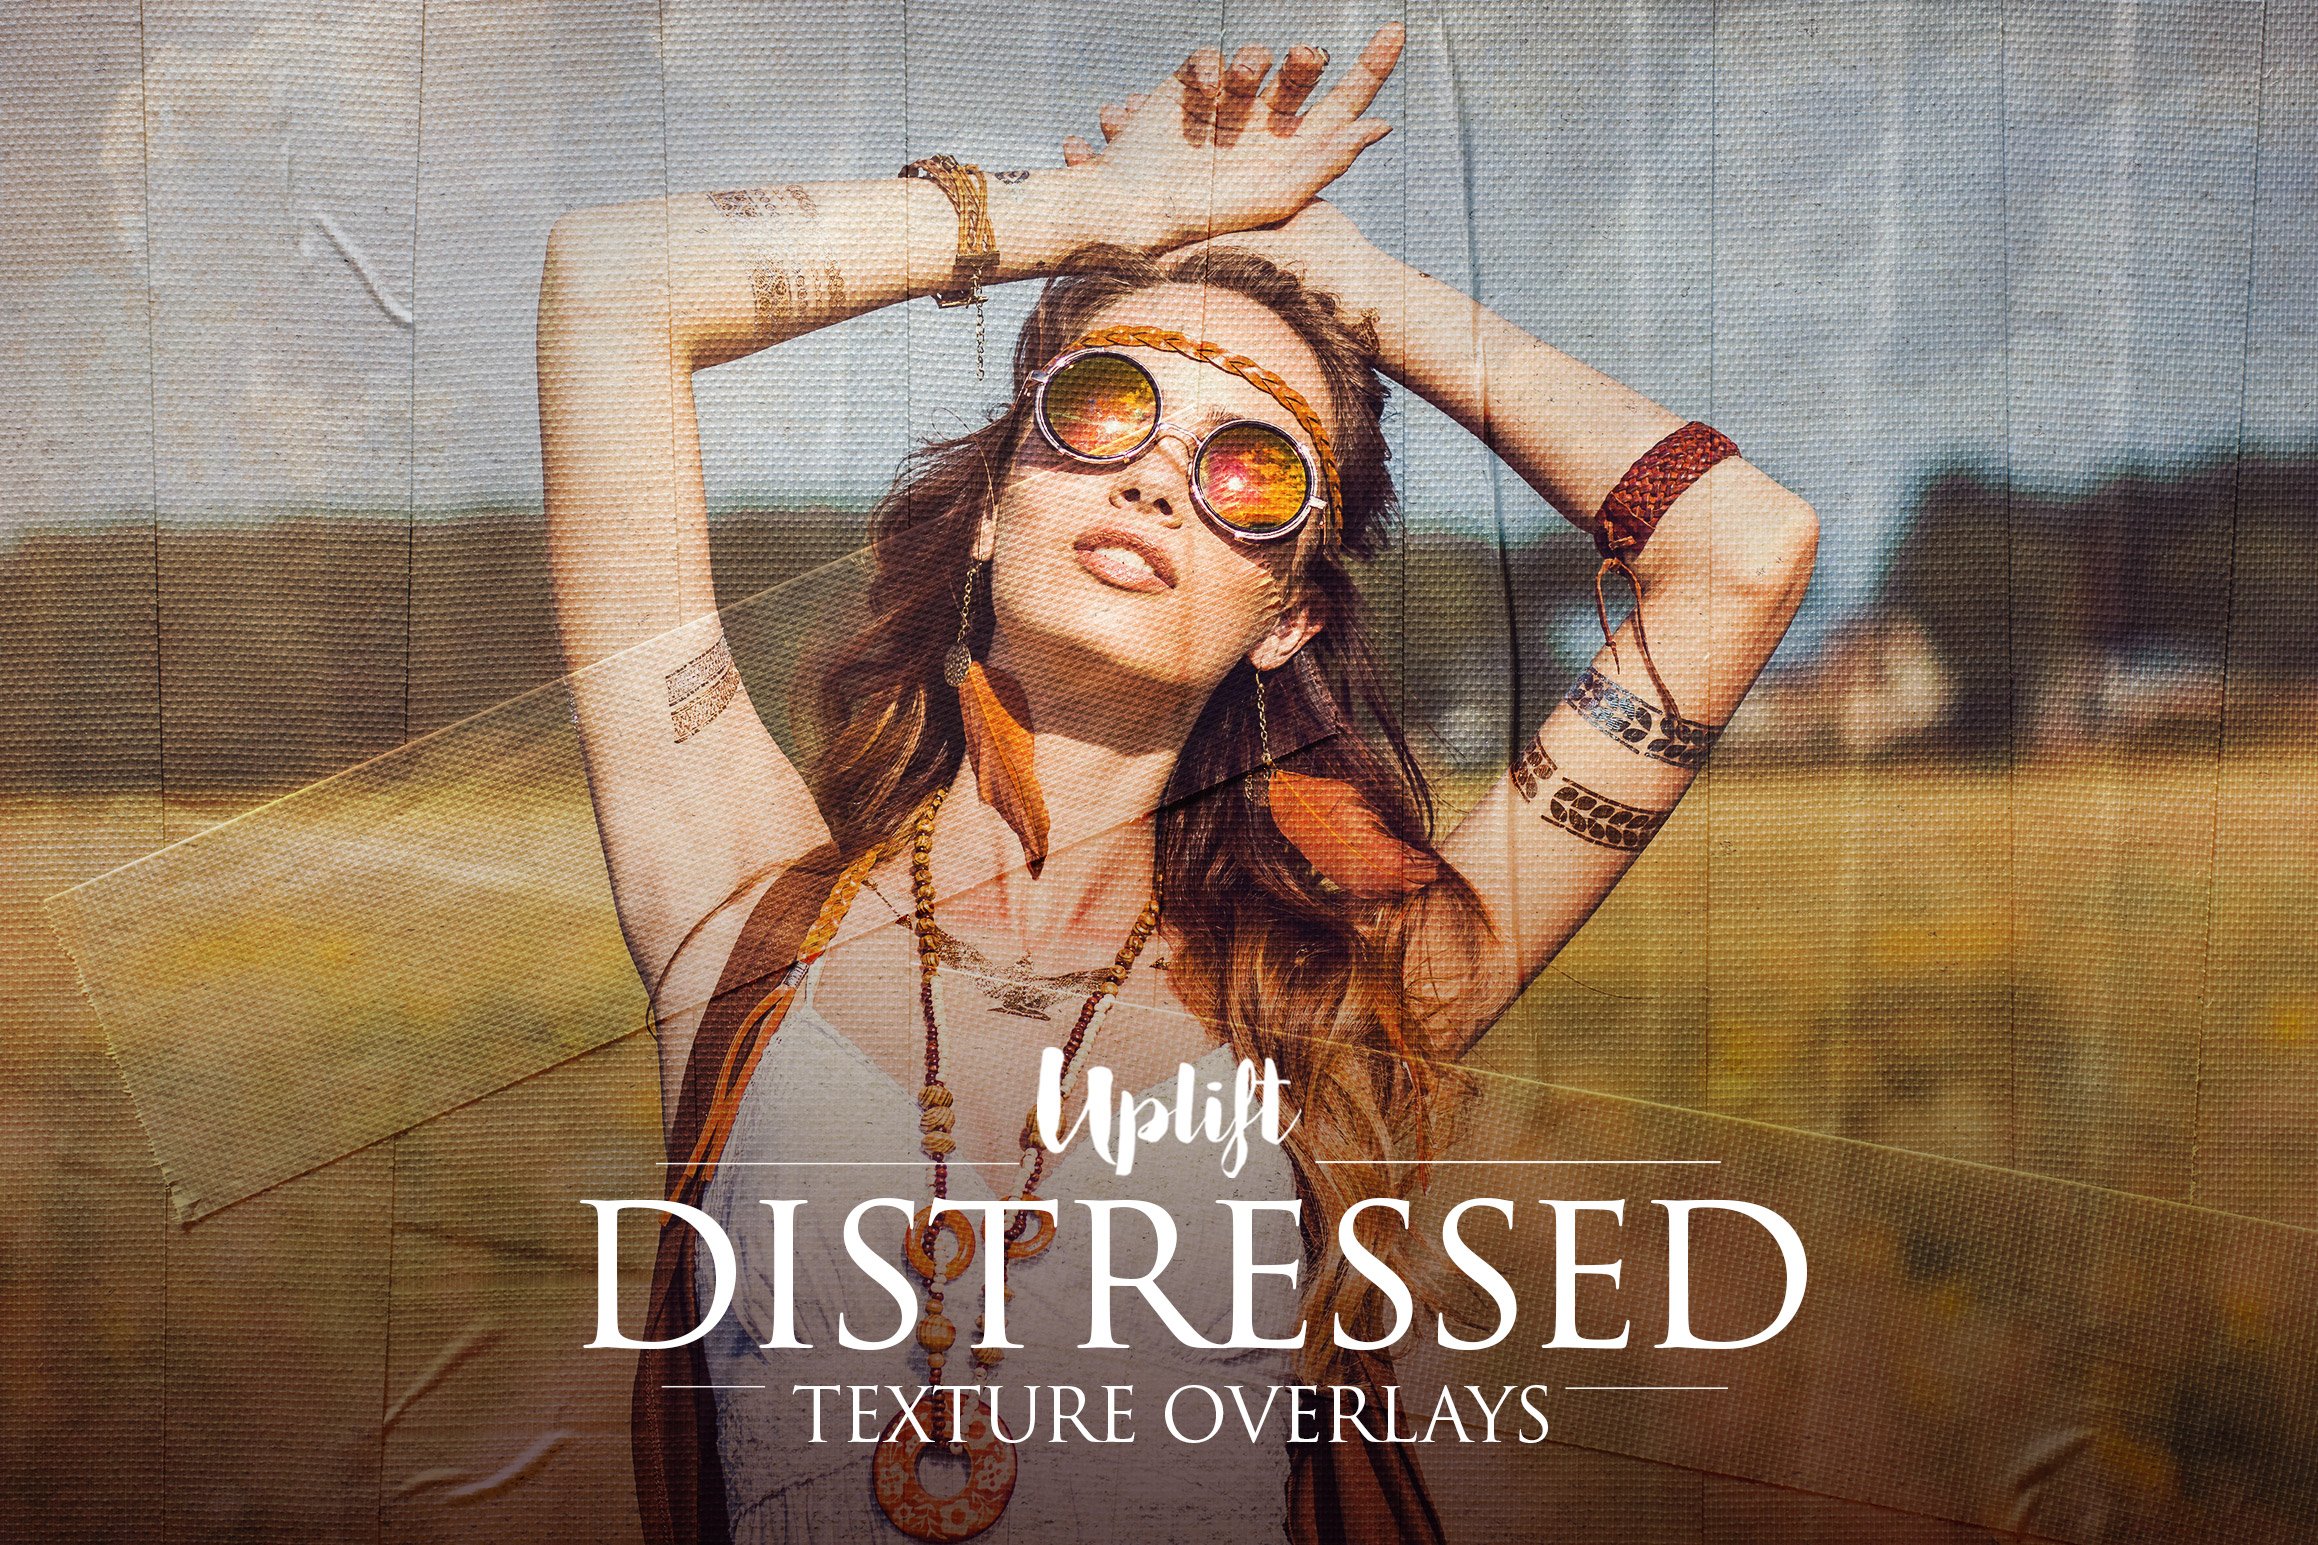 50 DISTRESSED Texture Overlayscover image.